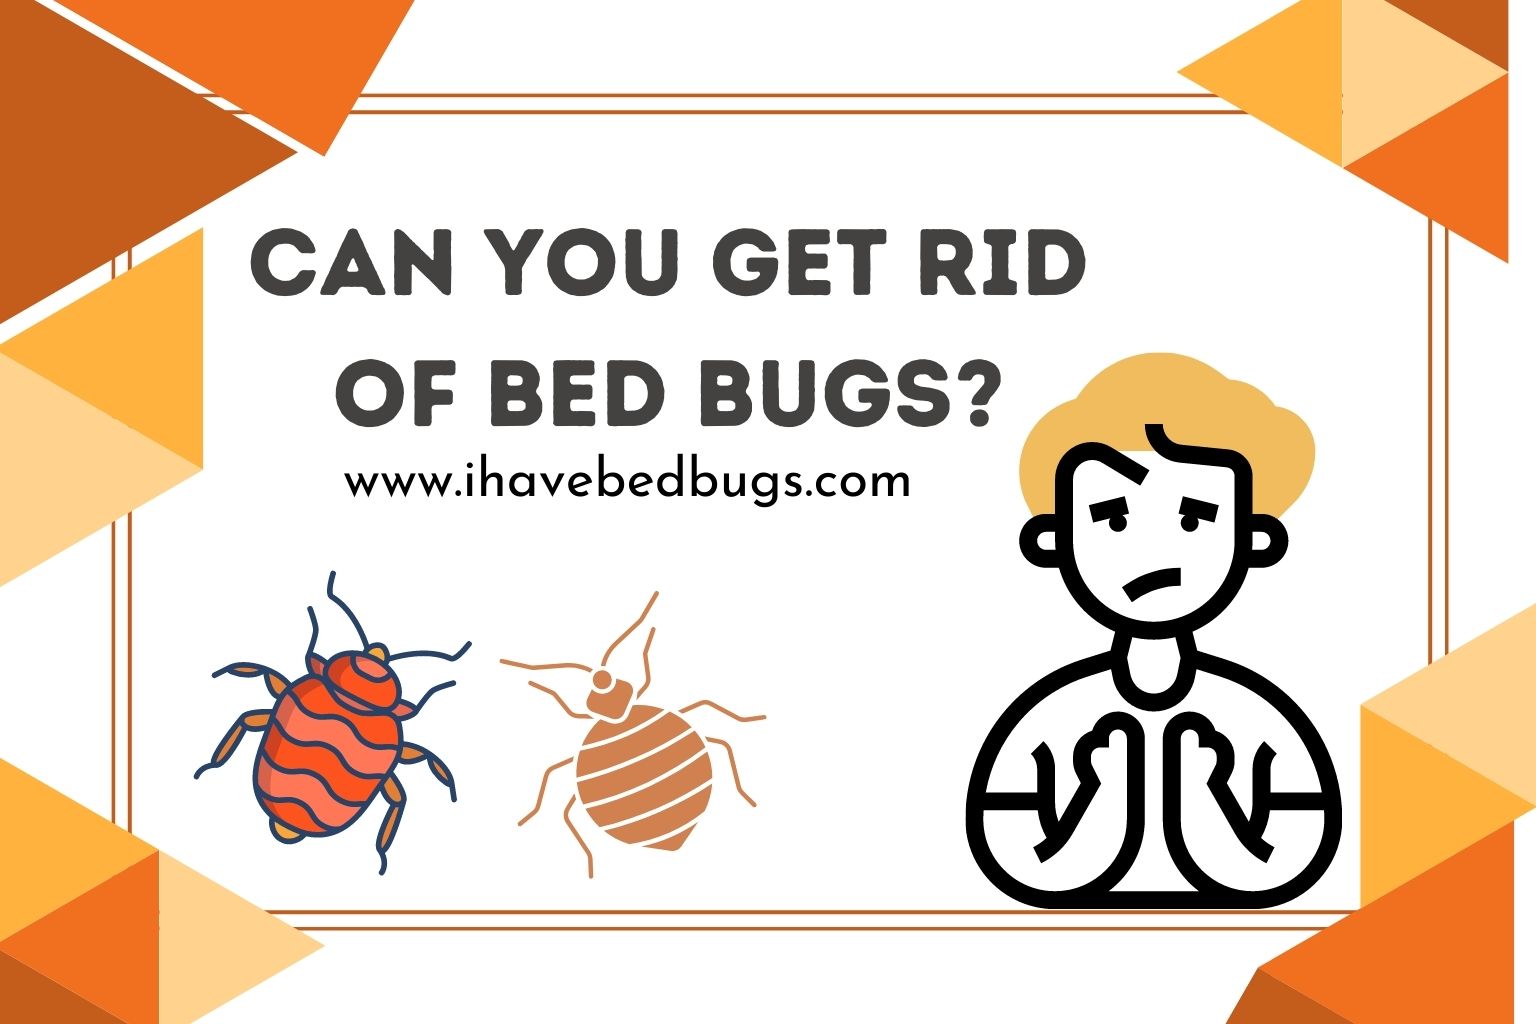 Can you get rid of bed bugs